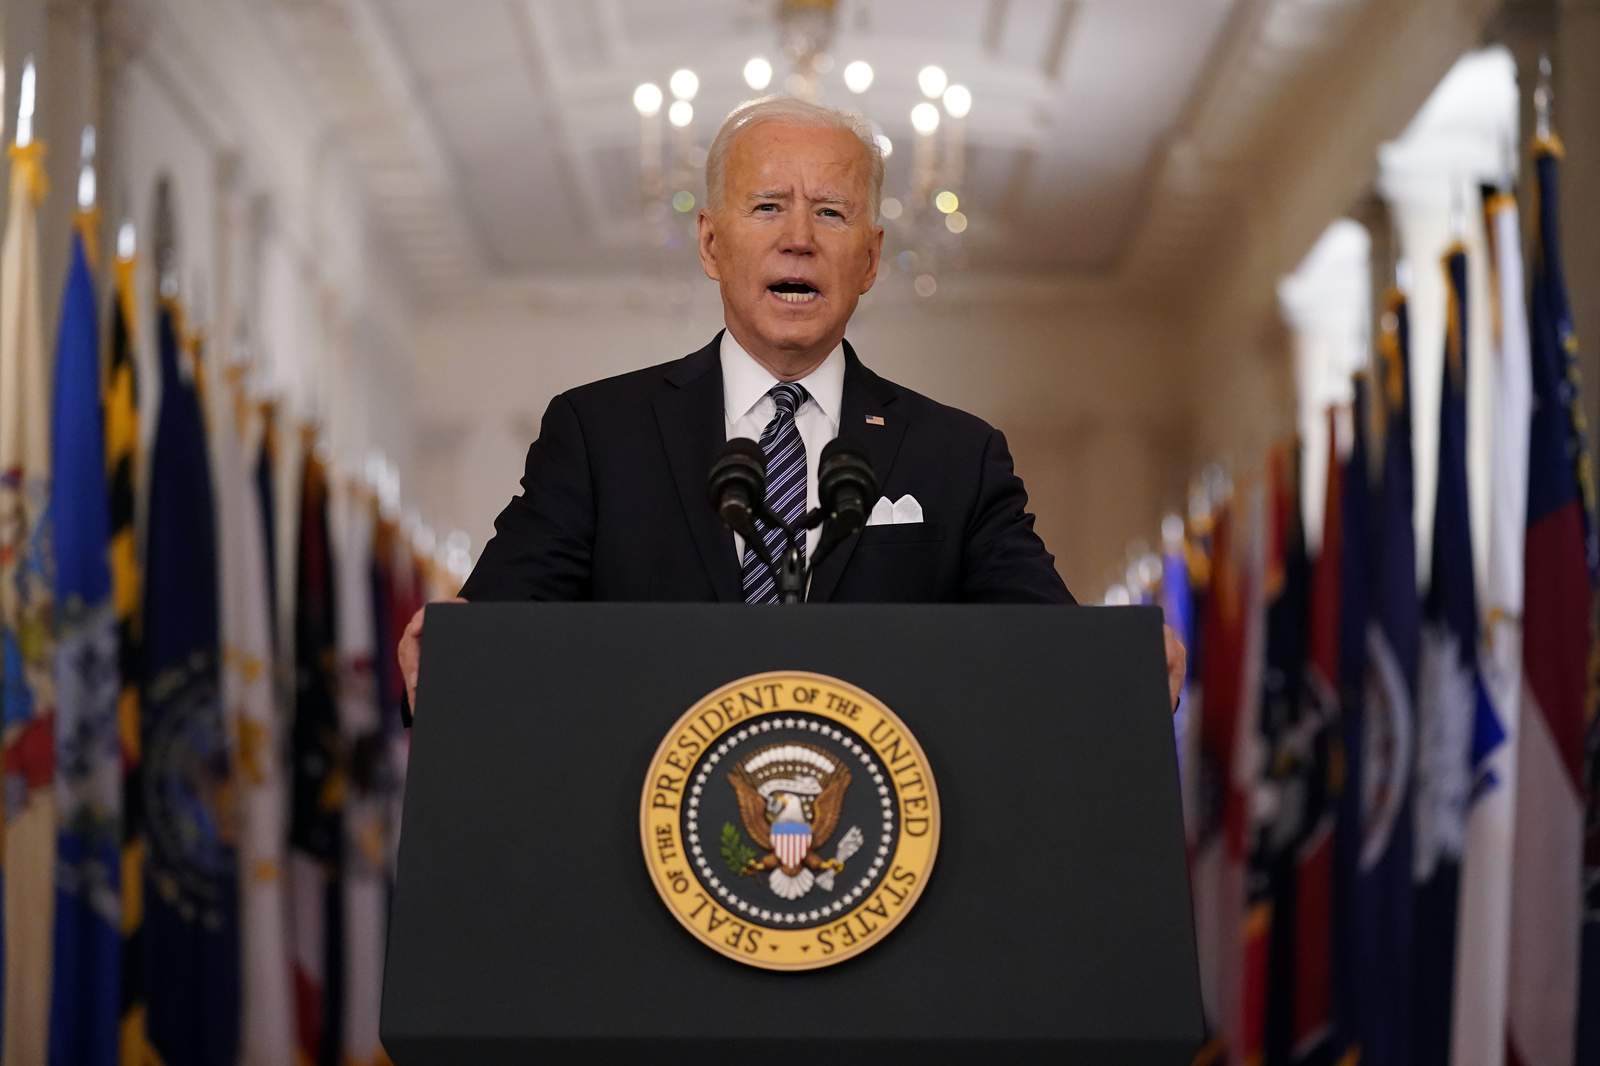 Biden signs $1.9 trillion relief bill, paving way for $1,400 stimulus checks, before speech to nation